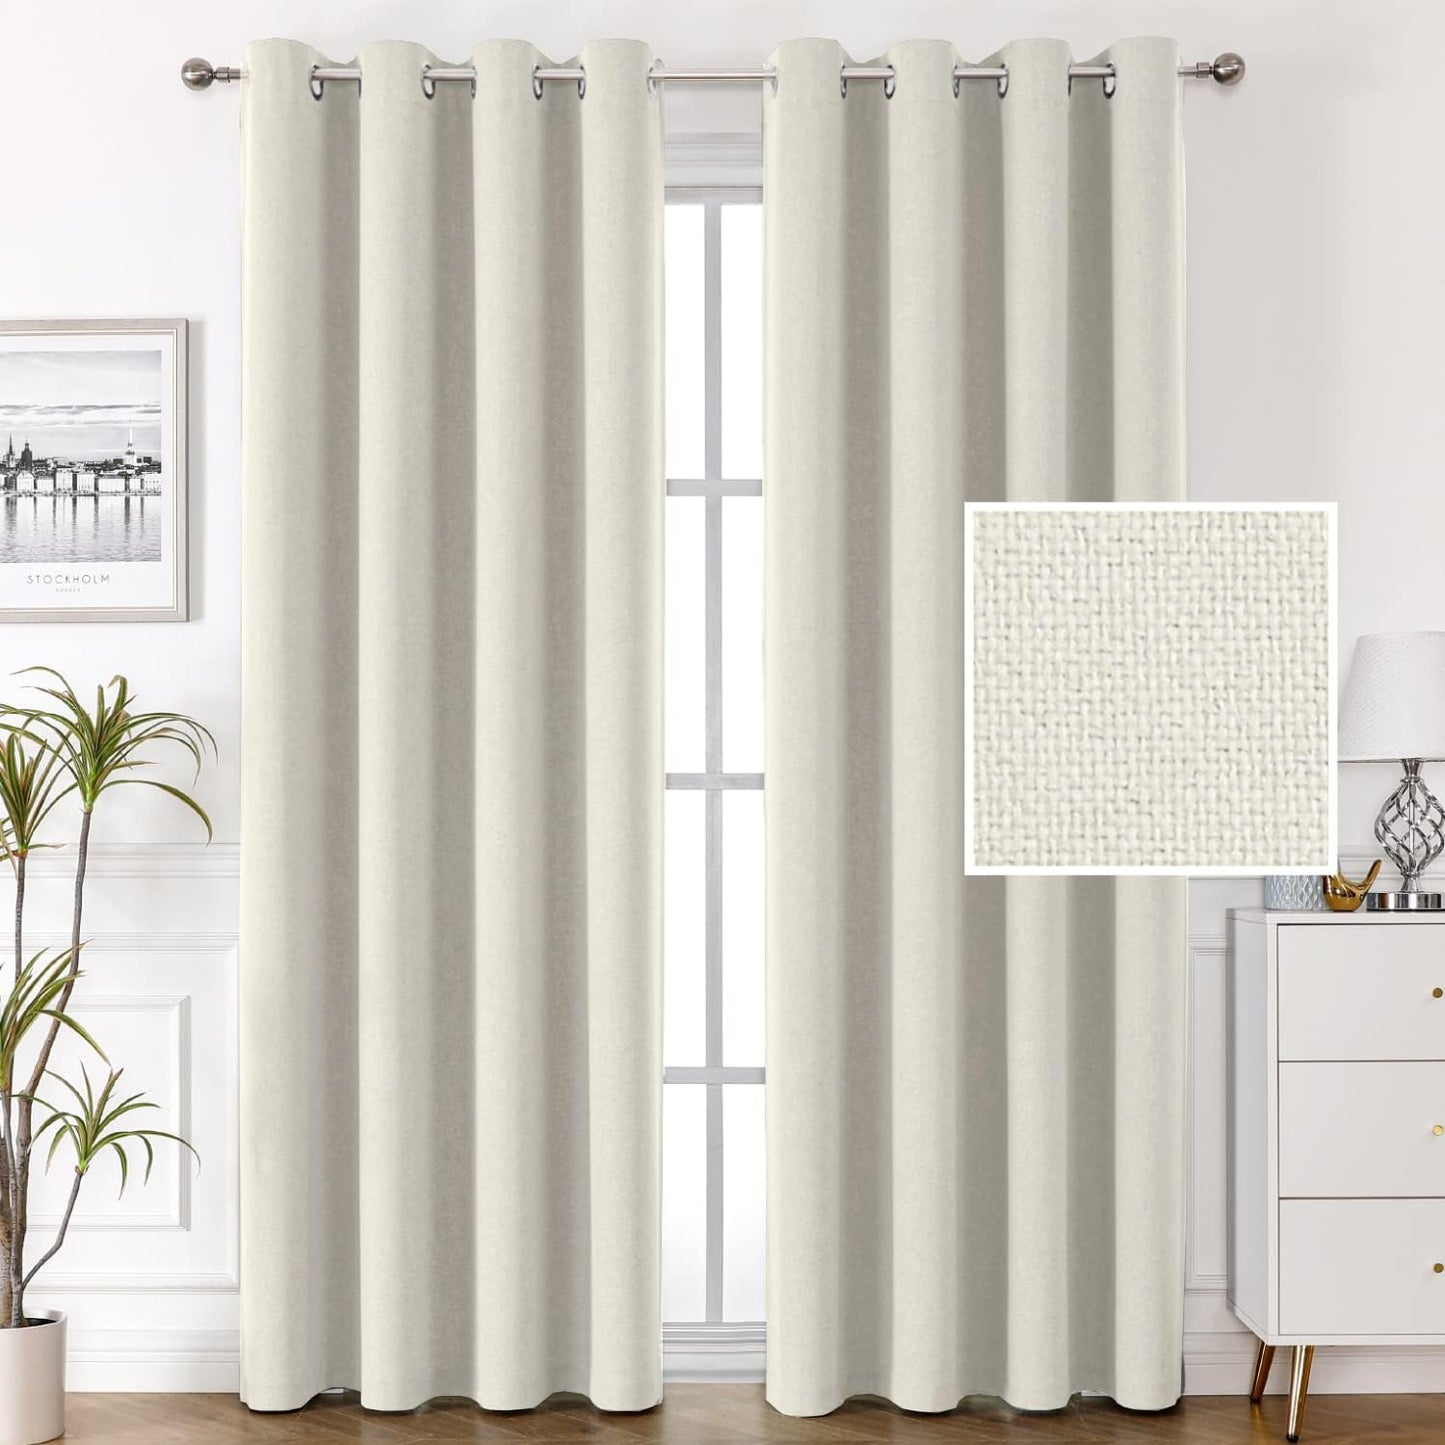 H.VERSAILTEX 100% Blackout Linen Look Curtains Thermal Insulated Curtains for Living Room Textured Burlap Drapes for Bedroom Grommet Linen Noise Blocking Curtains 42 X 84 Inch, 2 Panels - Sage  H.VERSAILTEX Ivory 52"W X 96"L 